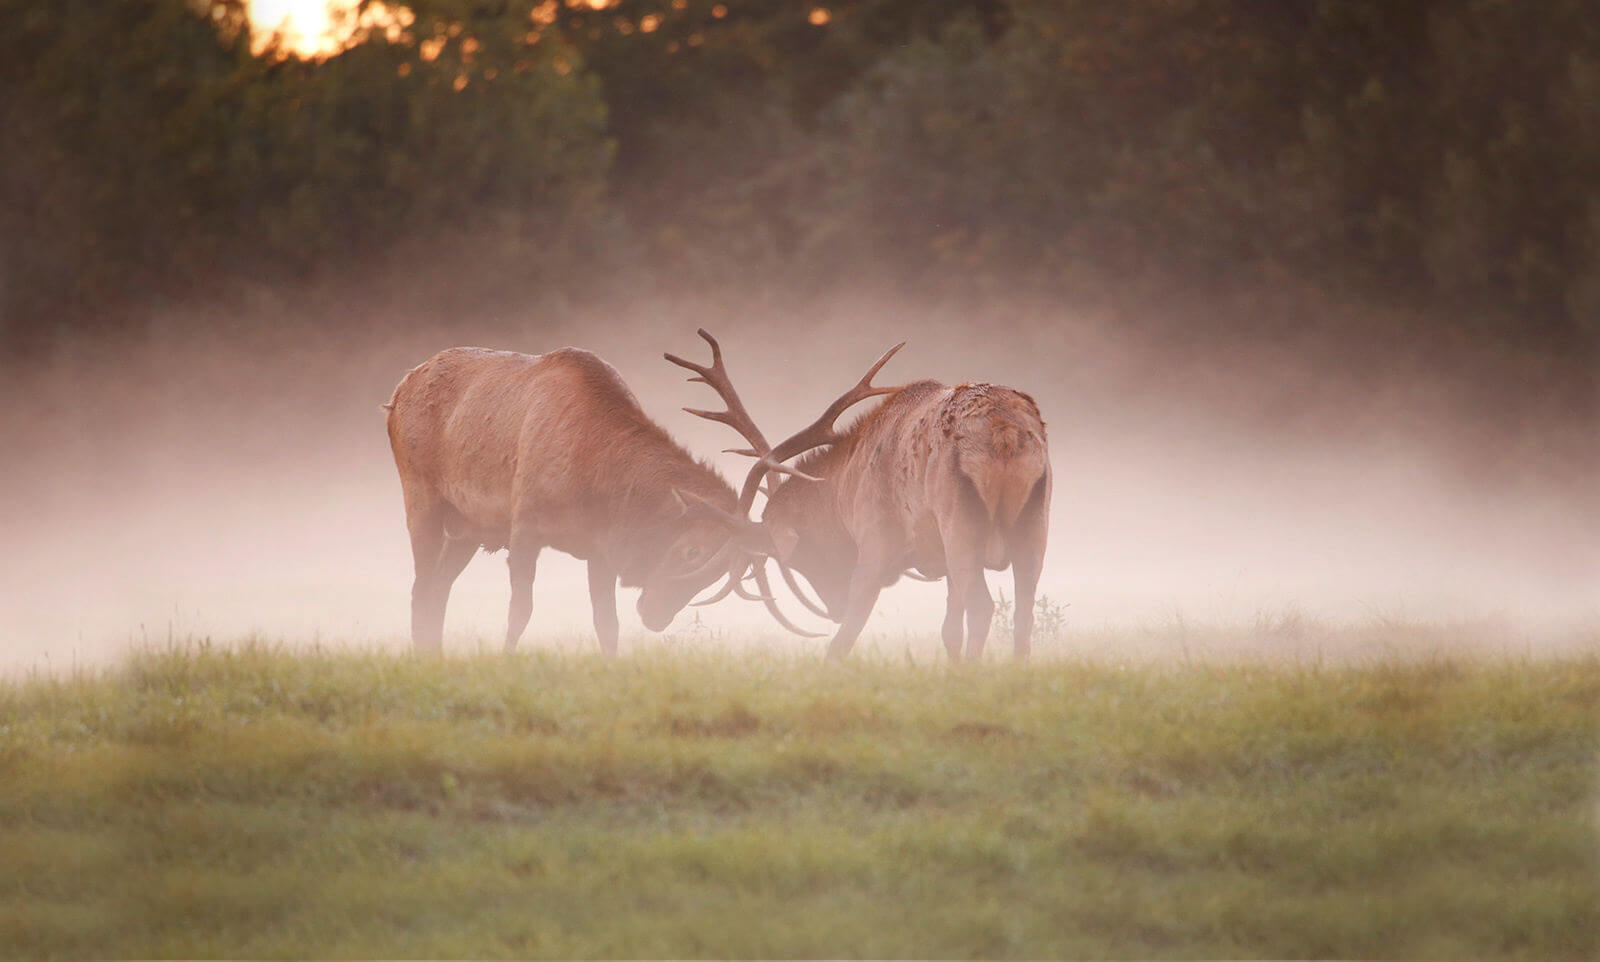 Bull Elk Fight captured by iNET photographers